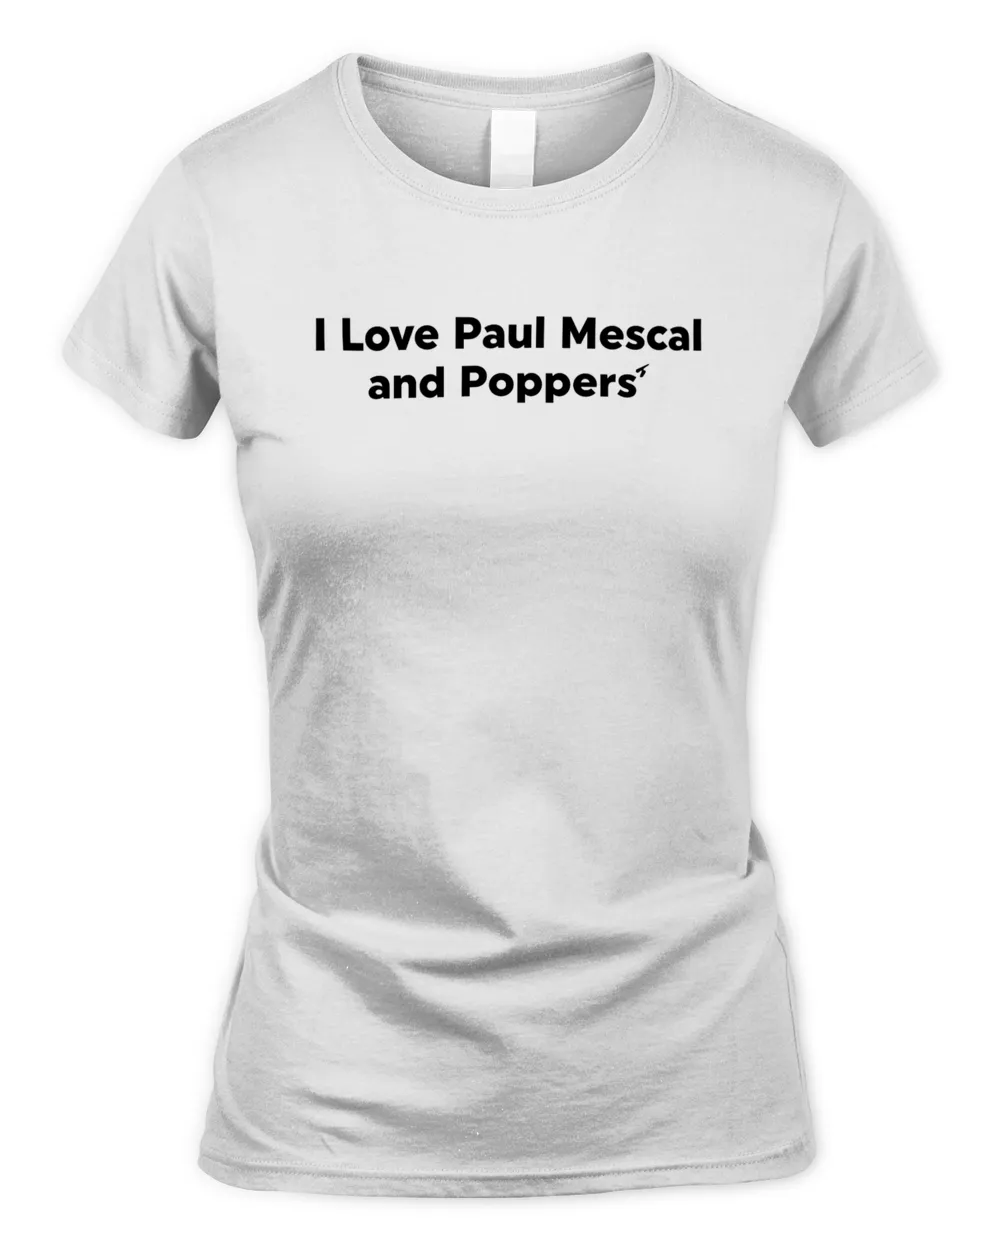 I Love Paul Mescal And Poppers' Tee Shirt Women's Soft Style Fitted T-Shirt white 